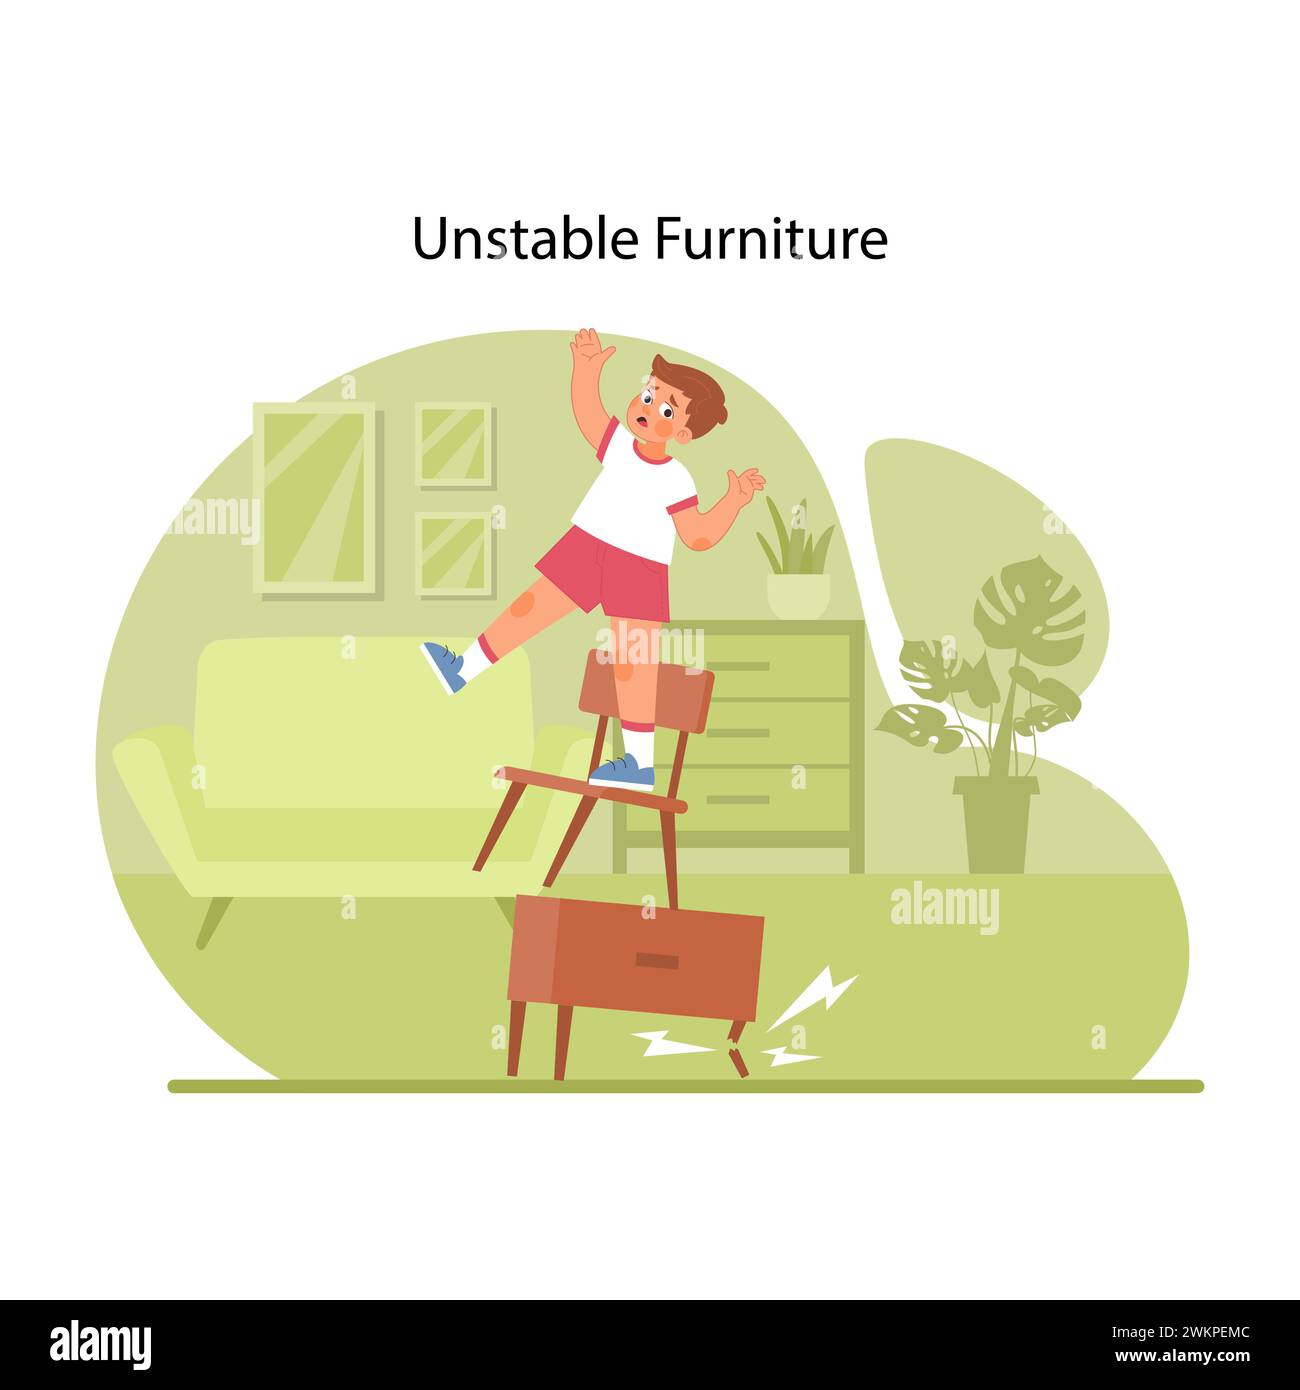 Furniture safety incident. Startled young boy teetering on chair, demonstrating dangers of climbing on unstable furniture. Preventing injuries and accidents with kids. Flat vector illustration Stock Vector